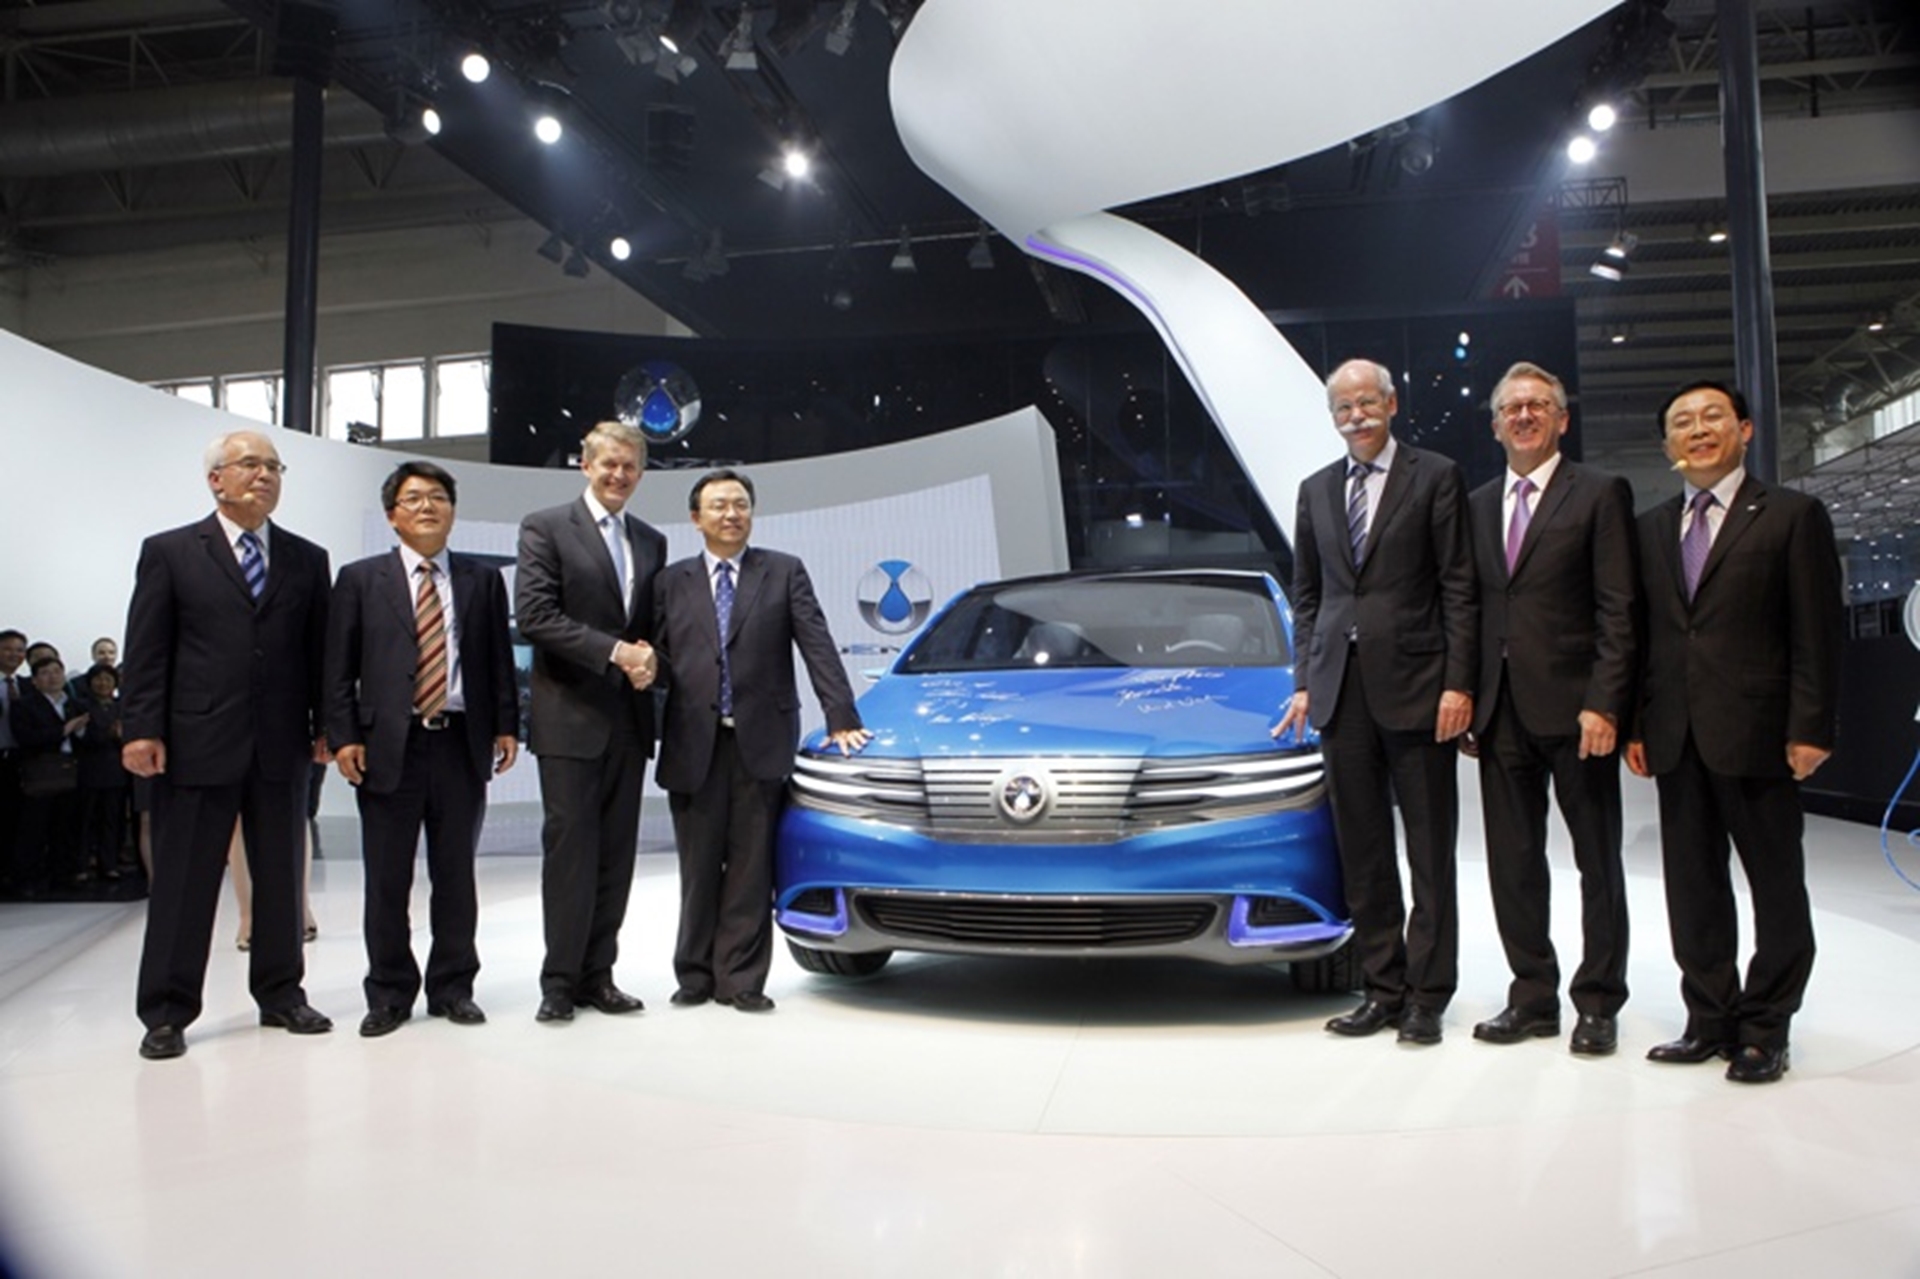 DENZA Unveils All-Electric Show Car at Auto China 2012 in Beijing